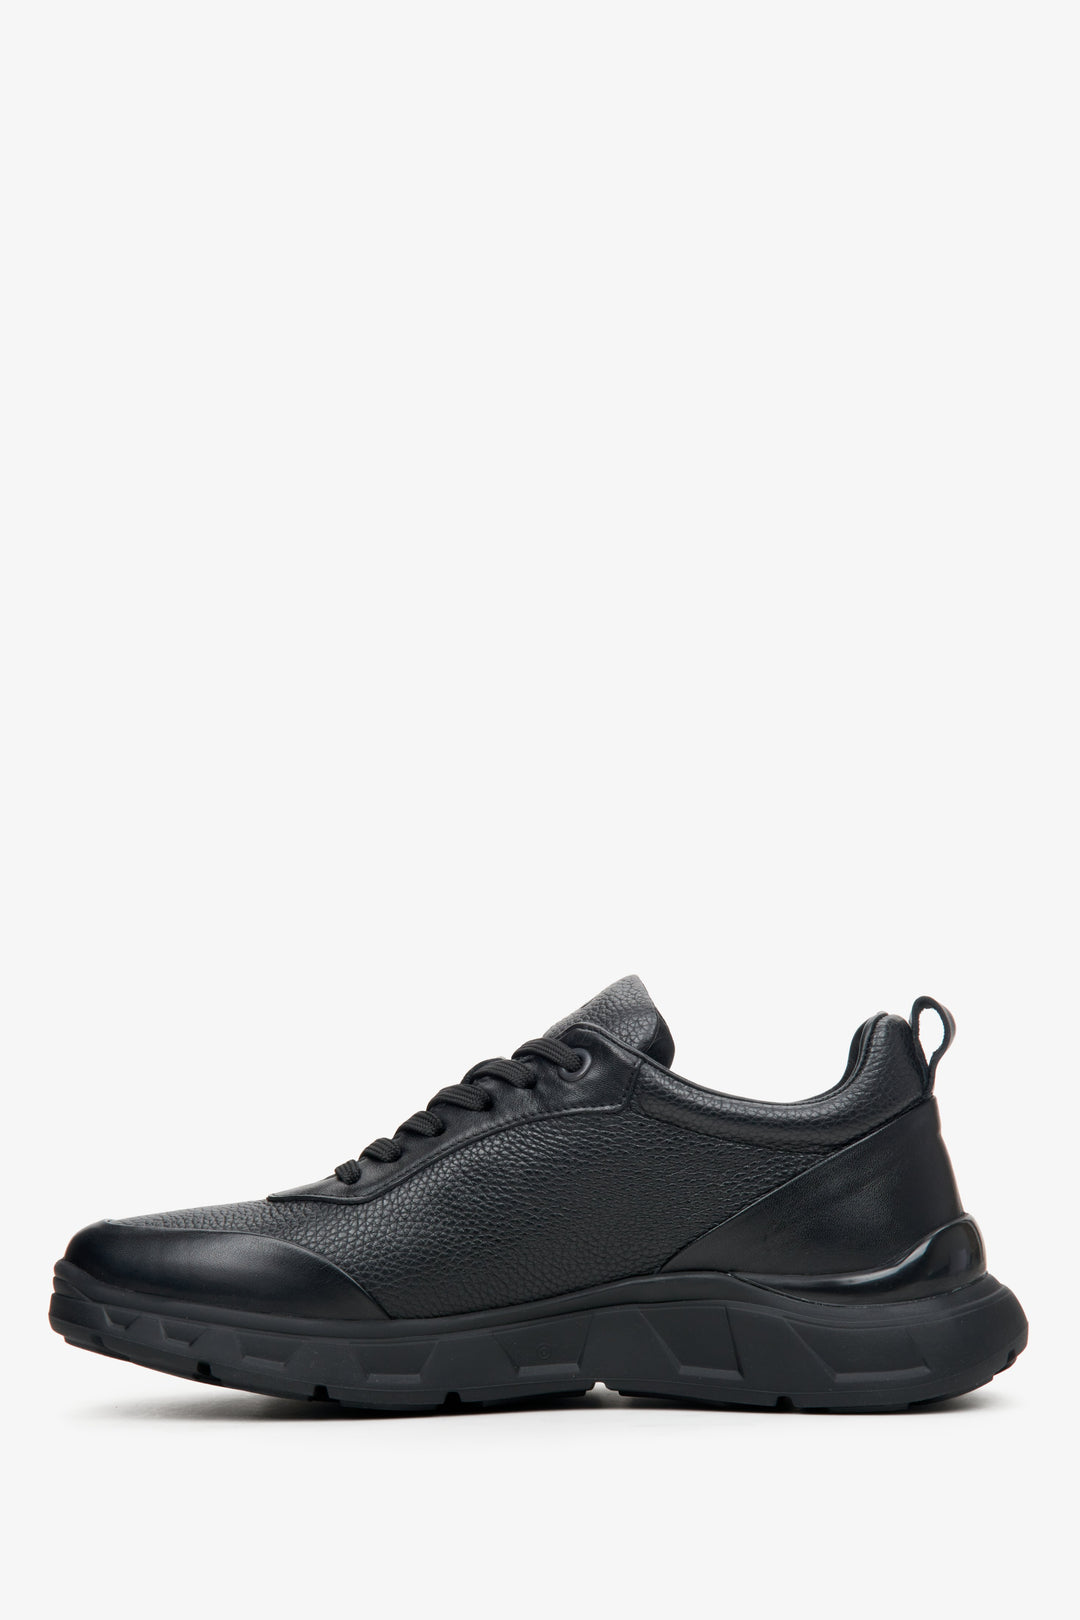 Men's black sneakers made of textured genuine leather by Estro - shoe profile.